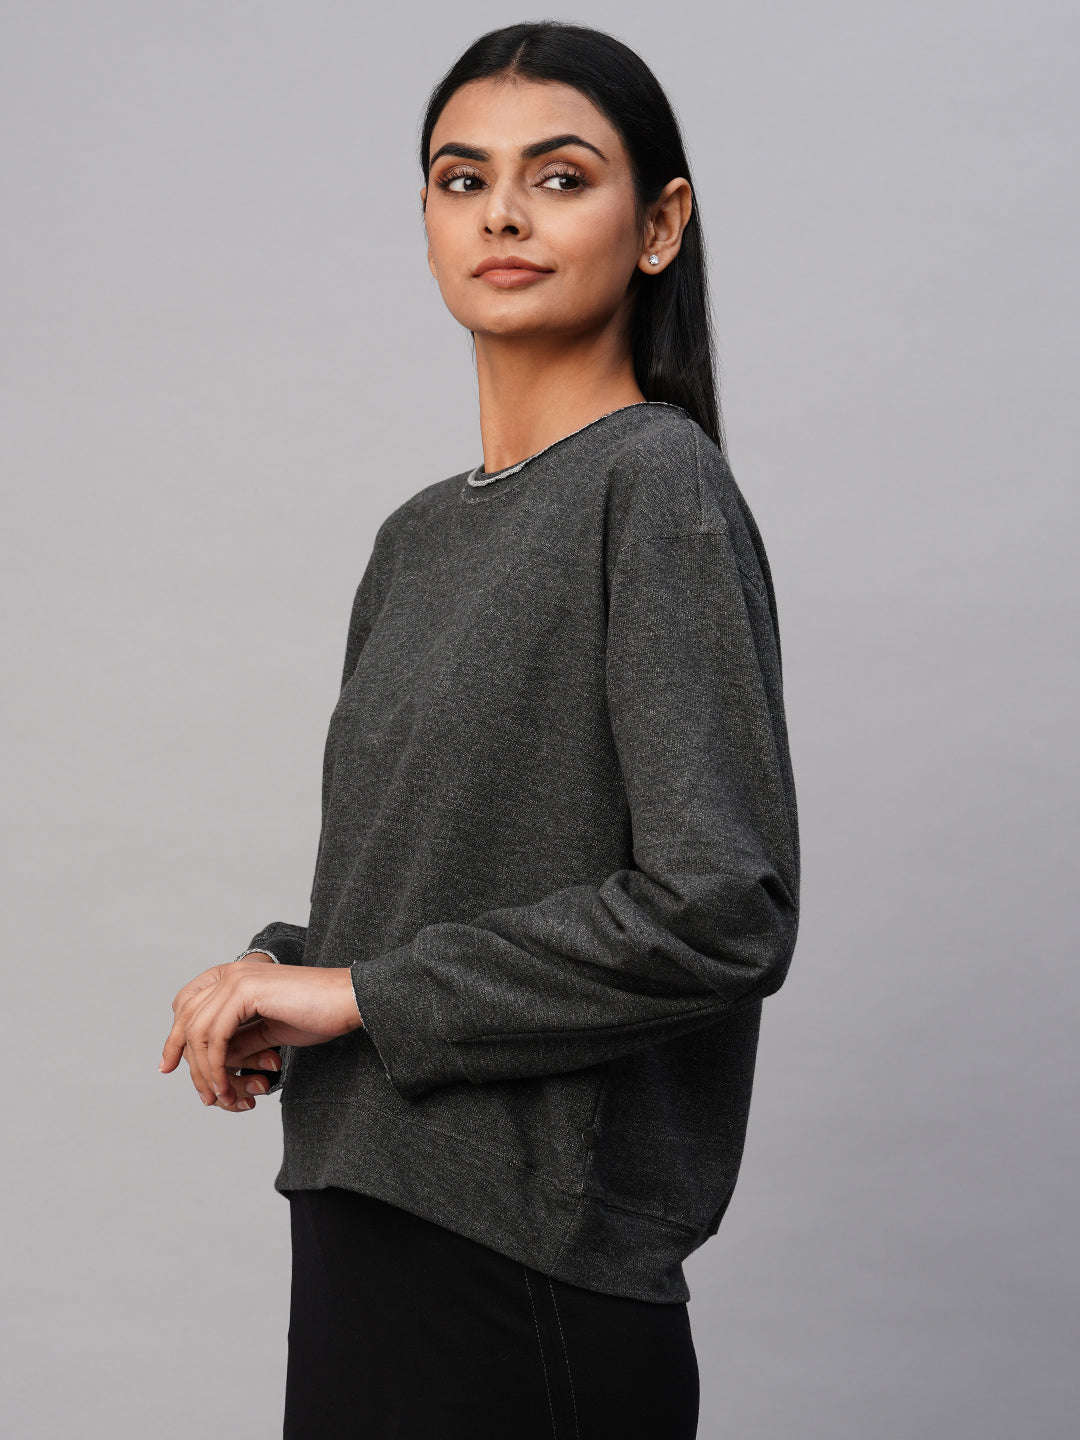 Stippled French Terry Drop Shoulder Sweatshirt W/ Tucked Detailed Sleeves